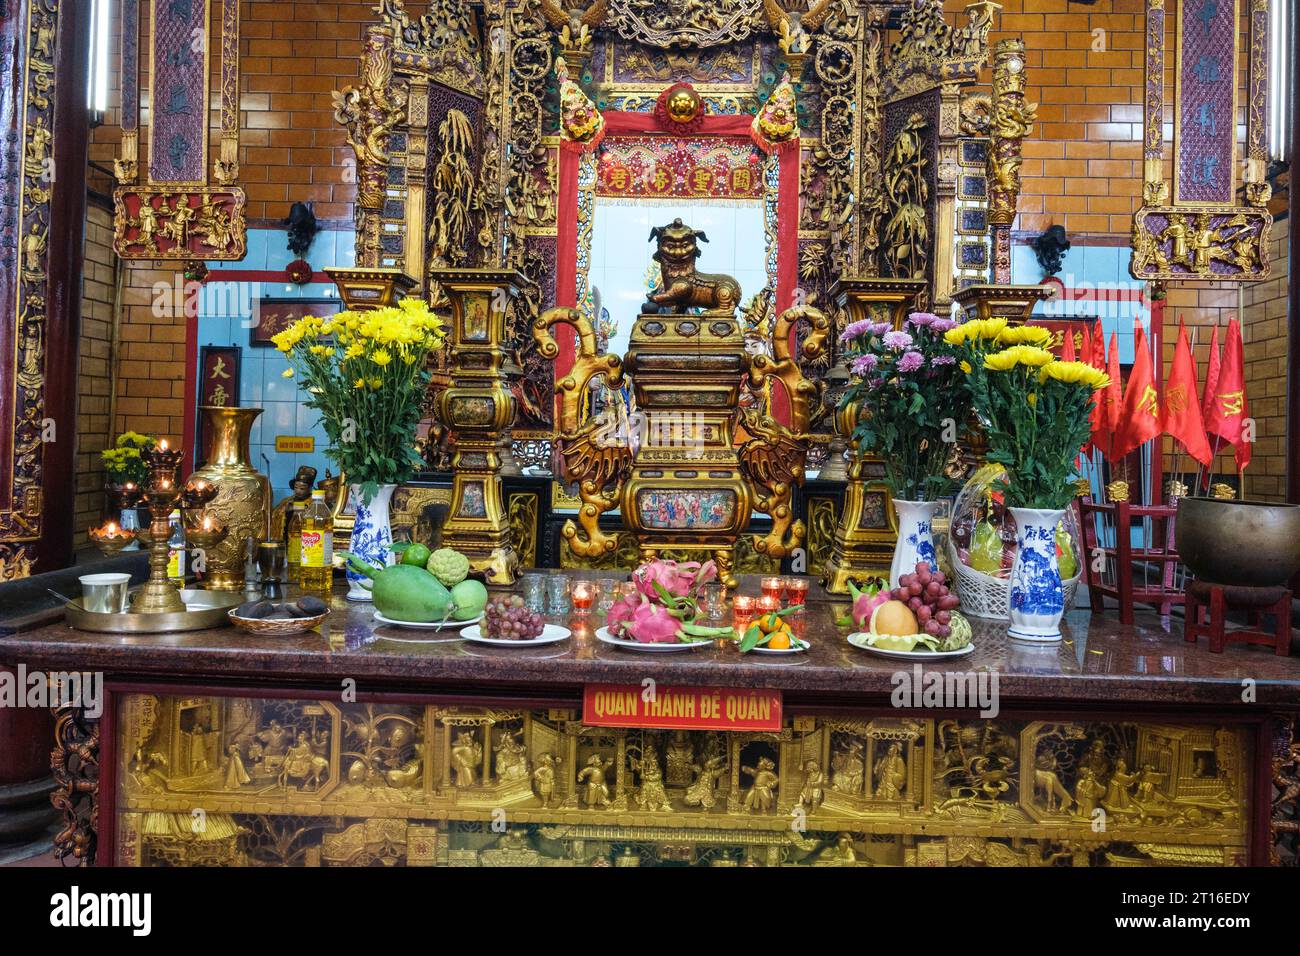 Can Tho, Vietnam. Offerings at Altar to Kuang Kung (Quan Cong) , Ong Temple (Chua Ong). Stock Photo